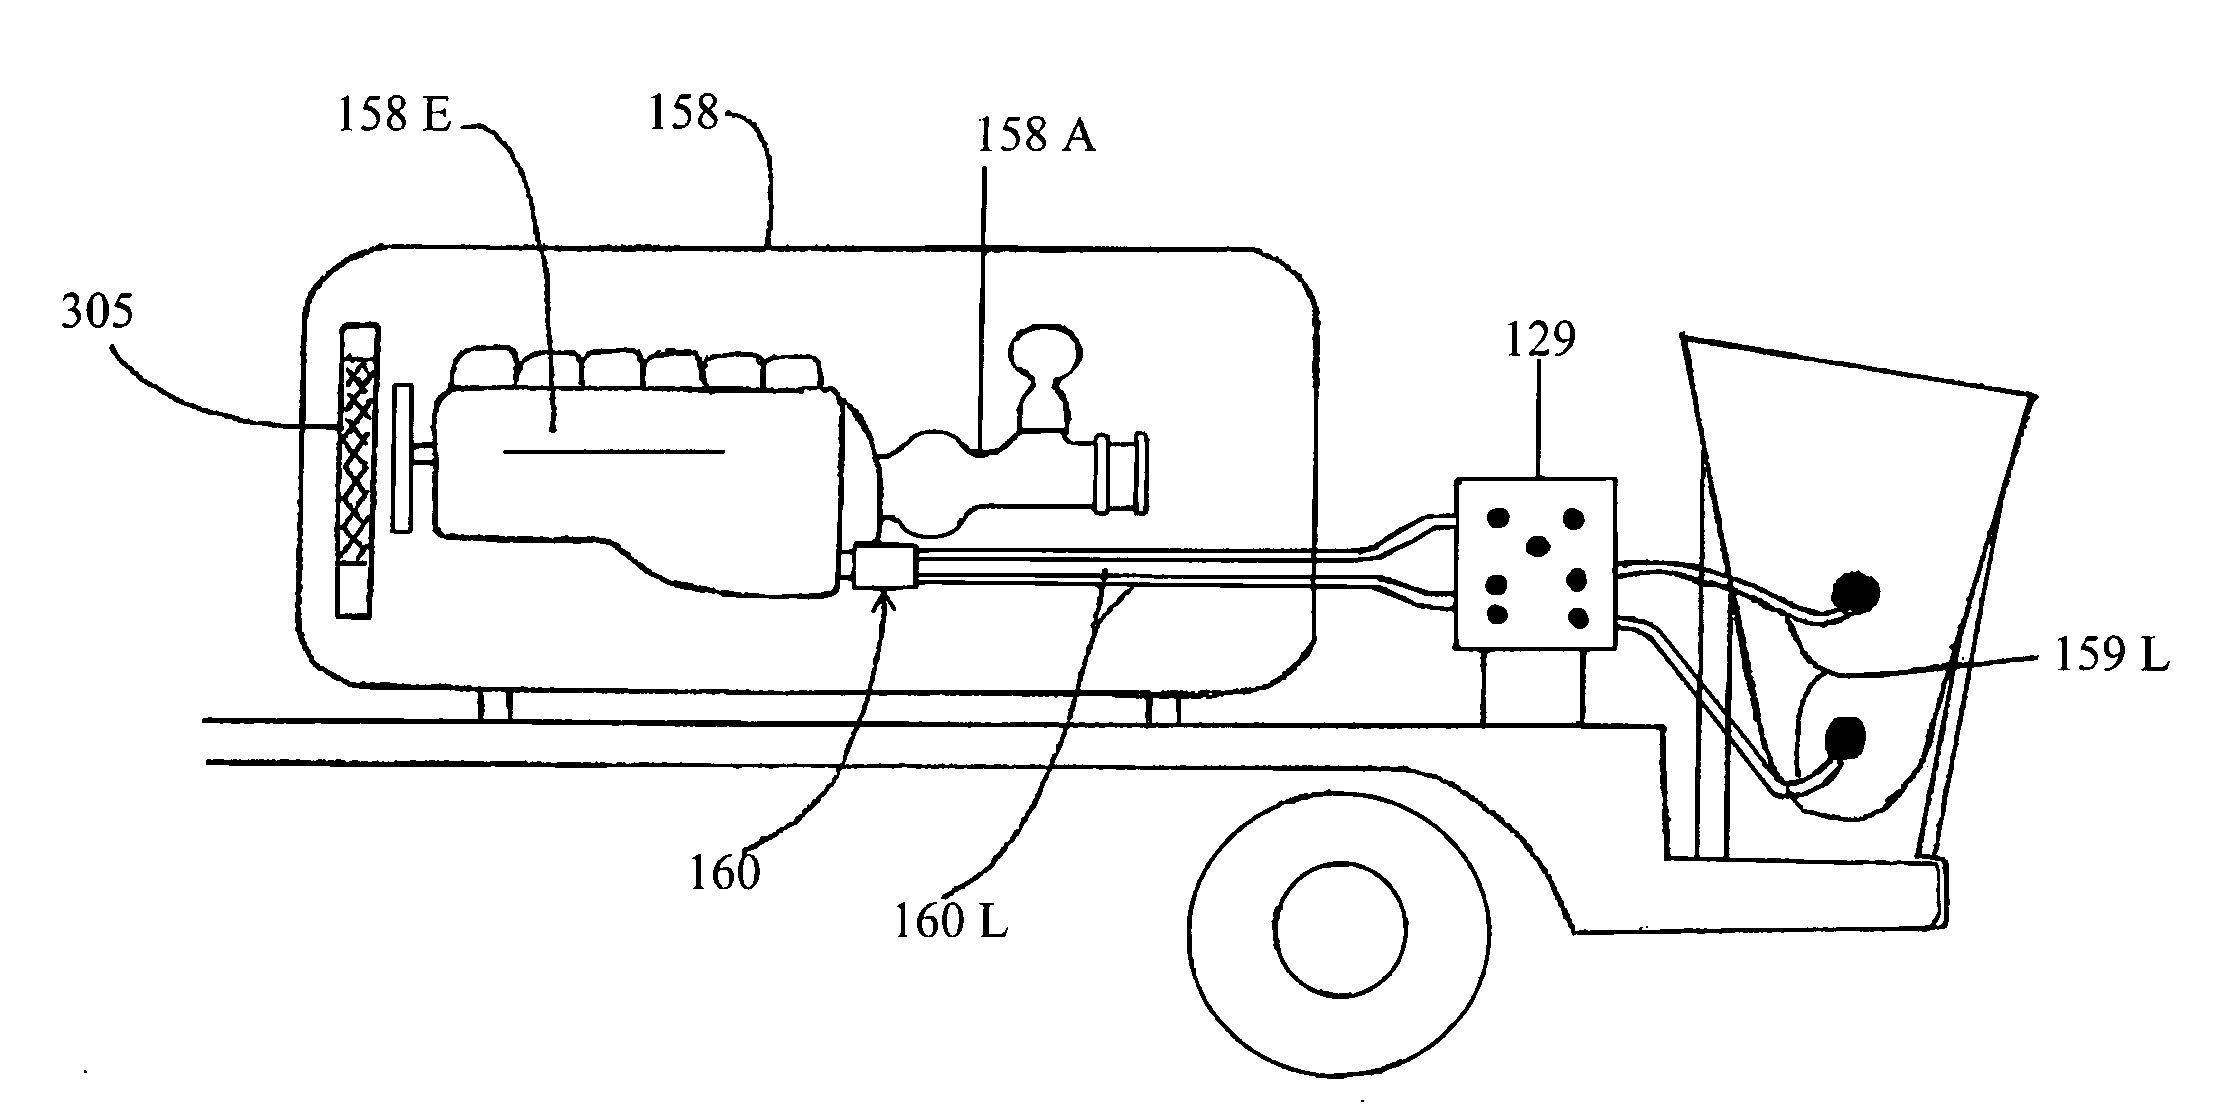 Apparatus and method for moving and placing granulate material